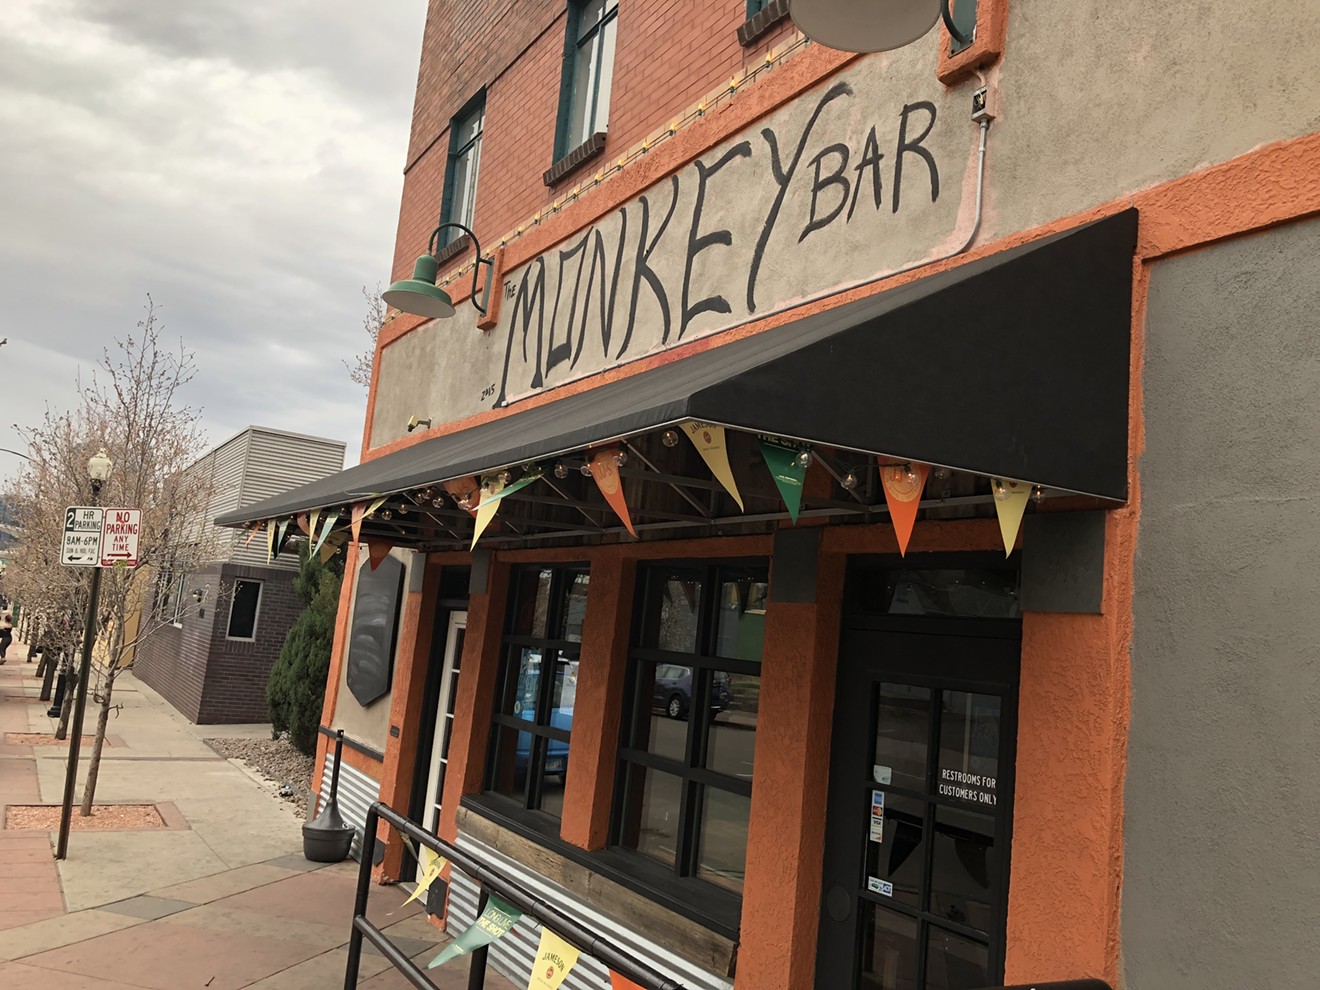 The Monkey Bar has been hanging around 1112 Santa Fe Drive for three years.